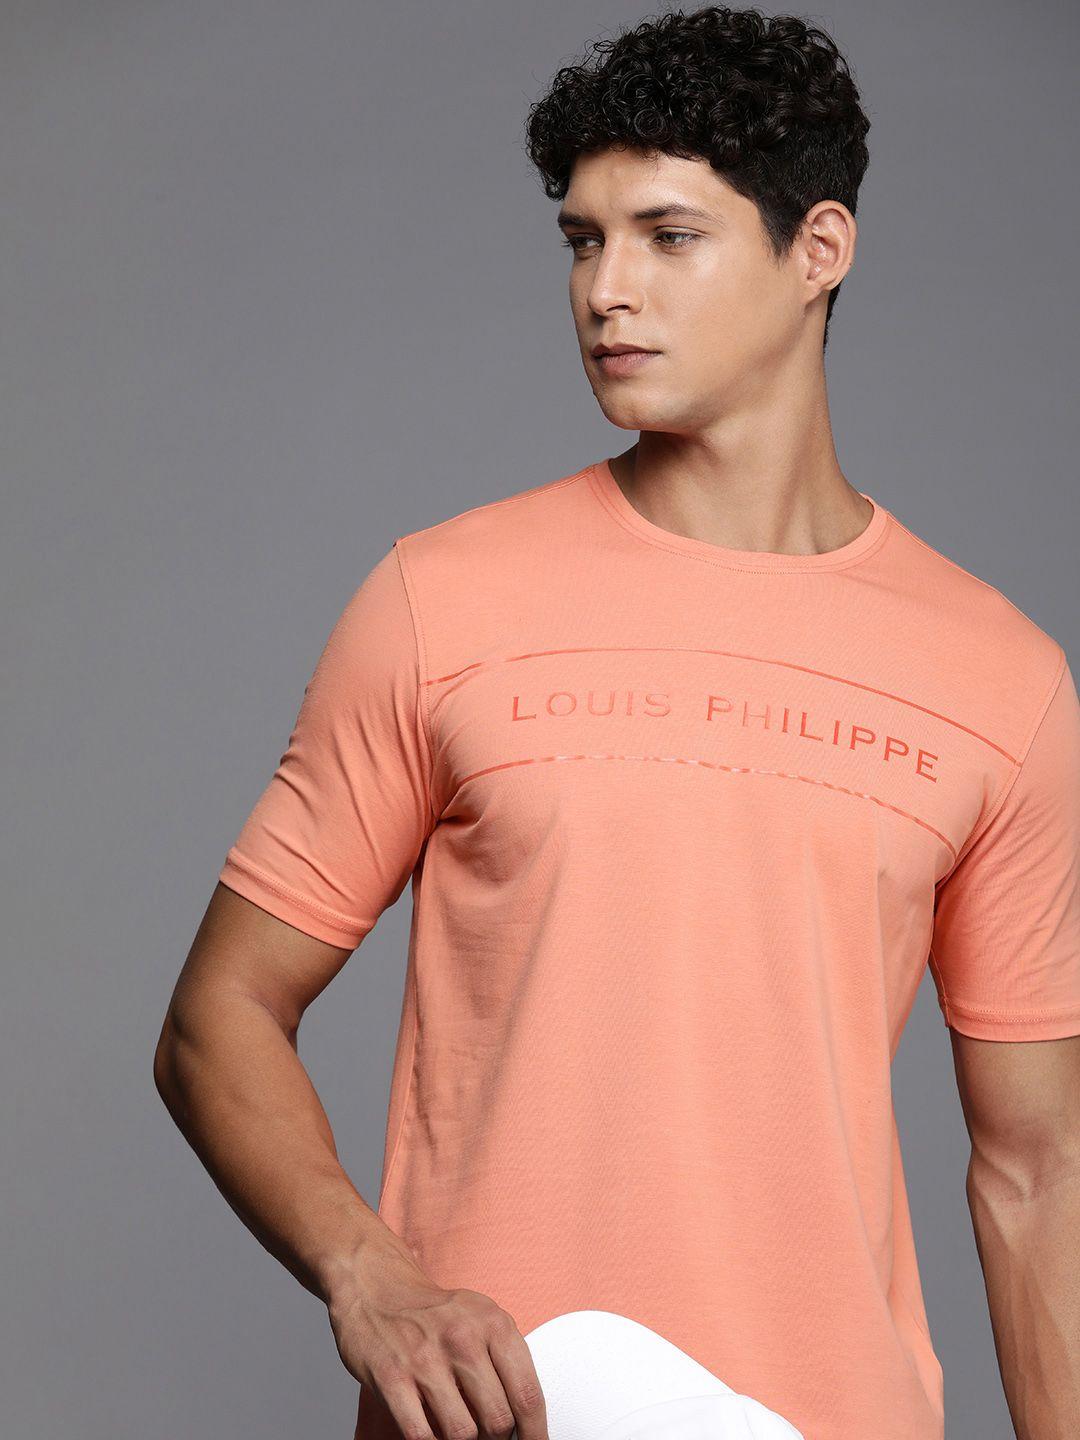 louis philippe athplay brand logo printed slim fit t-shirt